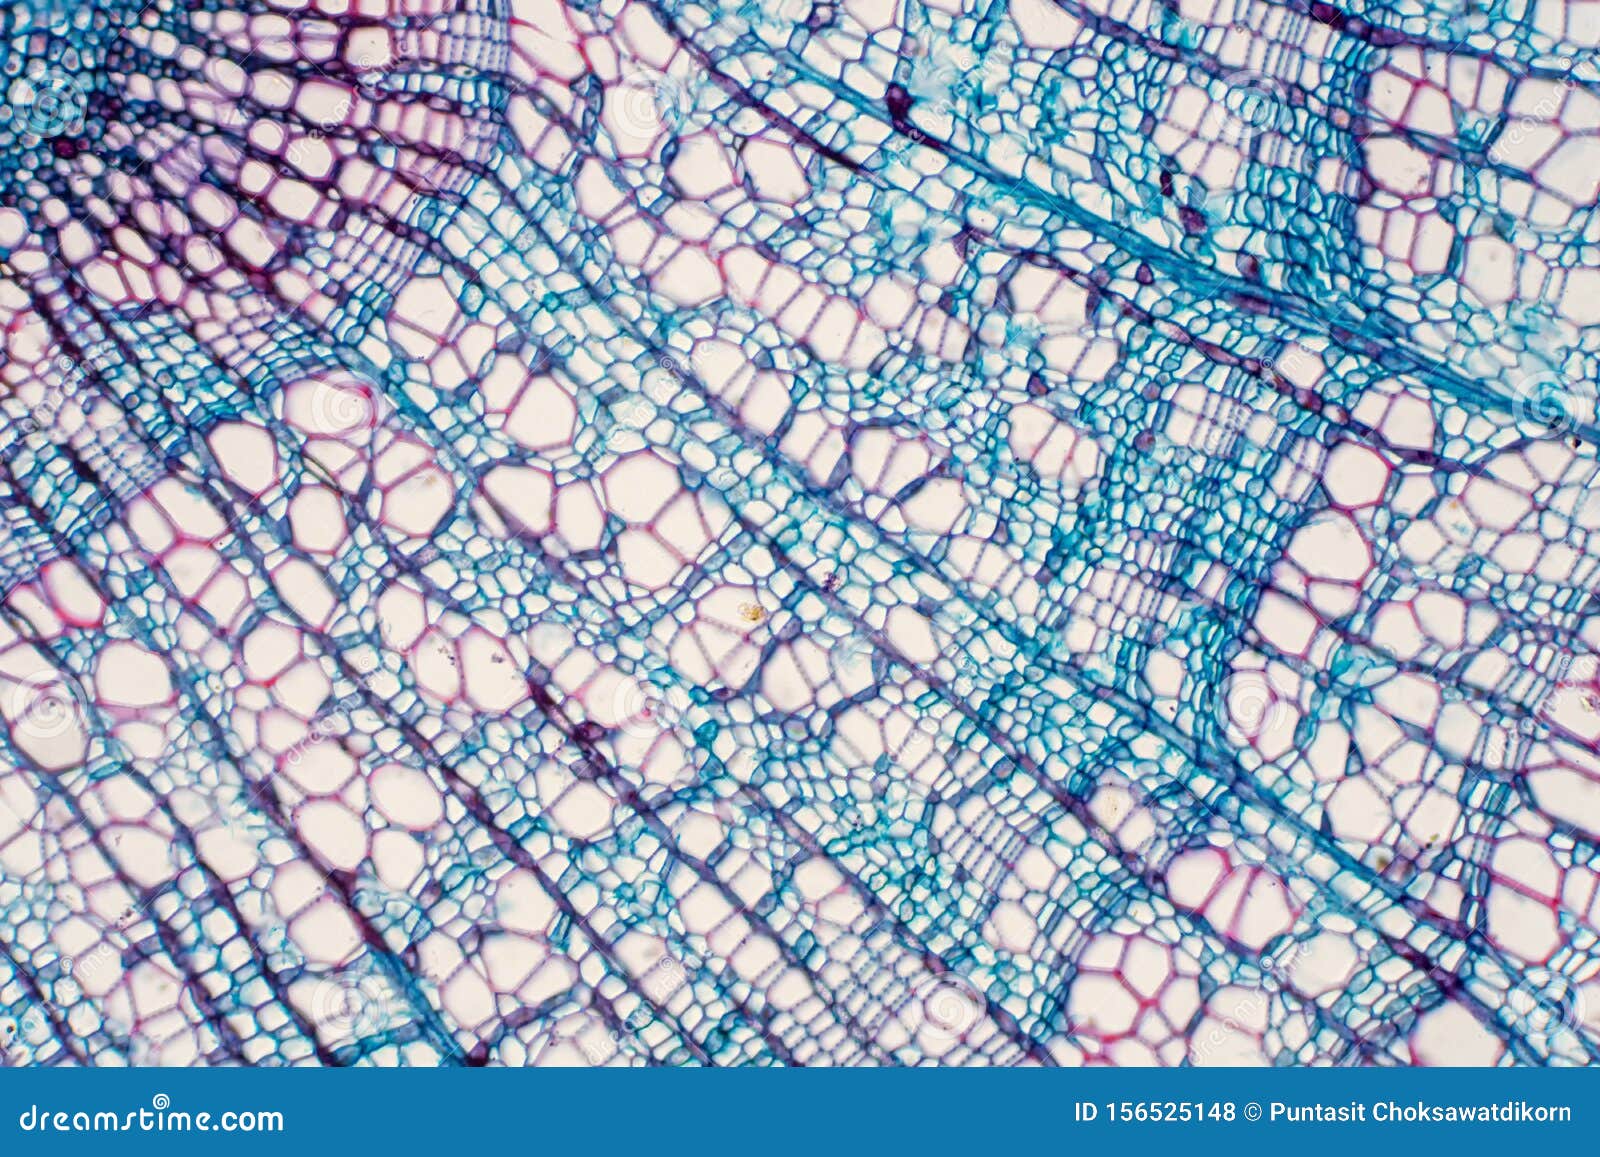 cross section - xylem is a type of tissue in vascular plants that transports water and some nutrients